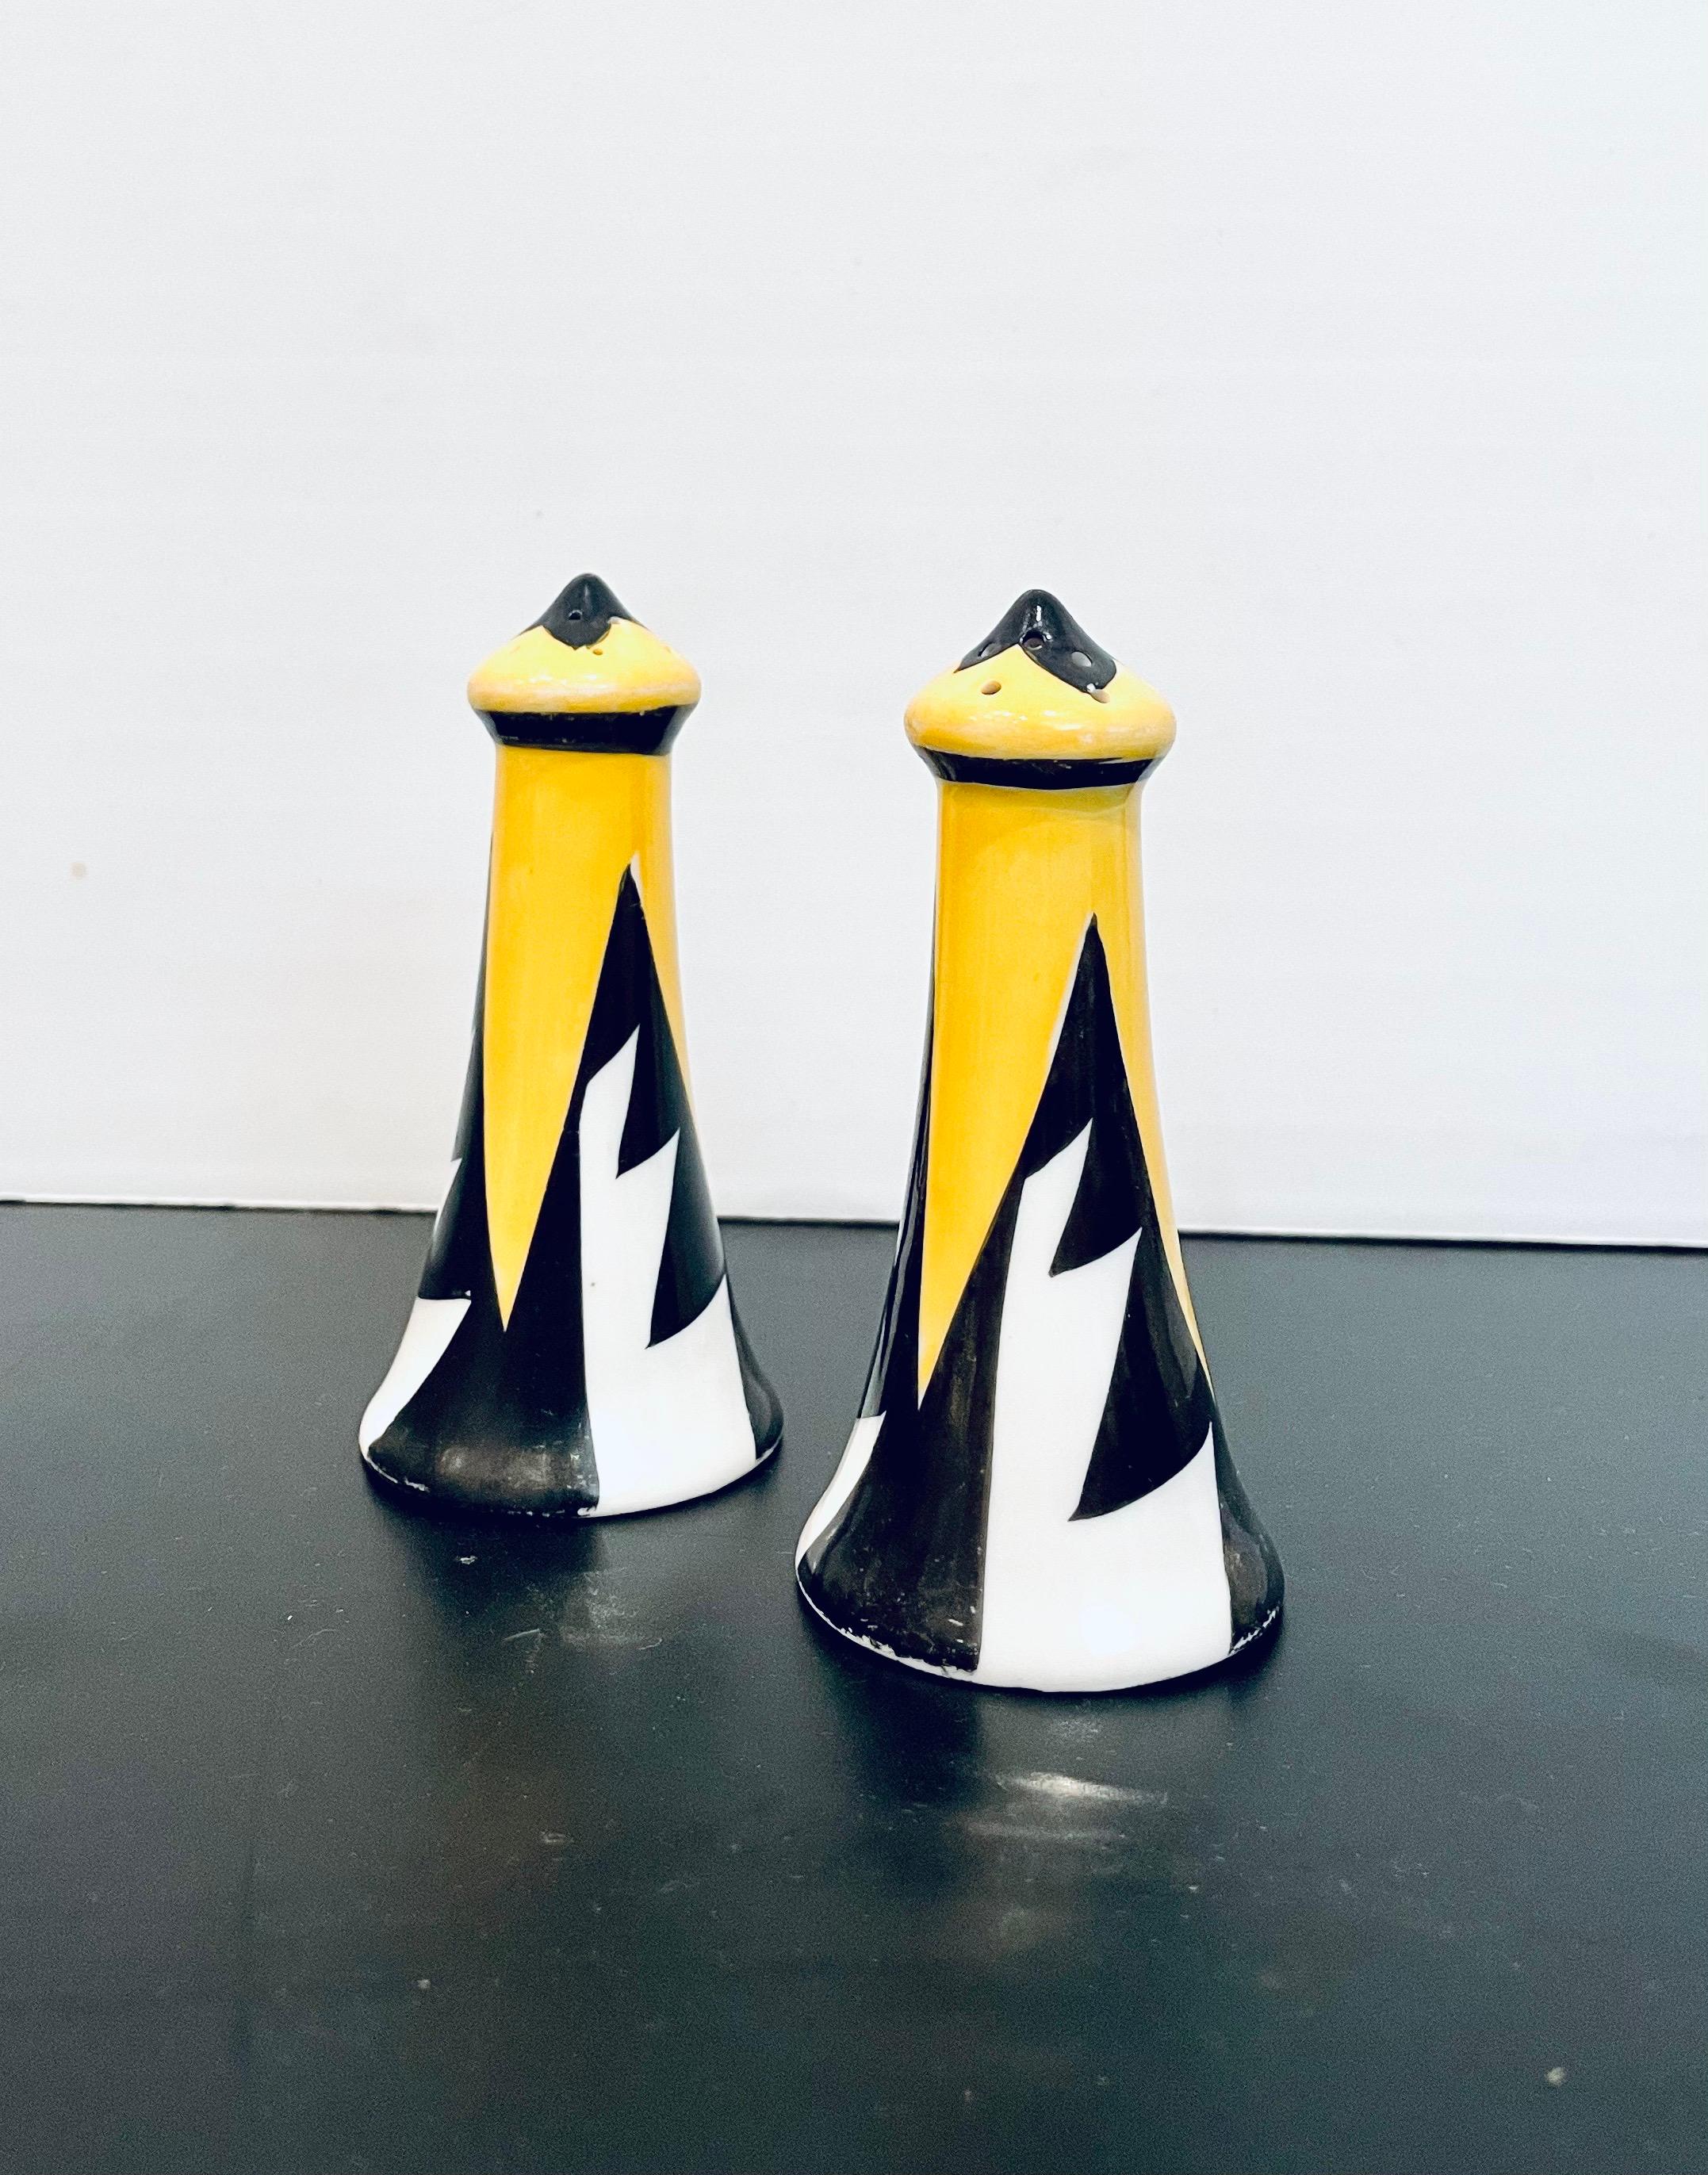 Beautiful pair of ceramic salt and pepper shakers in a porcelain finish, great design, and colors circa 1940s no chips or cracks.